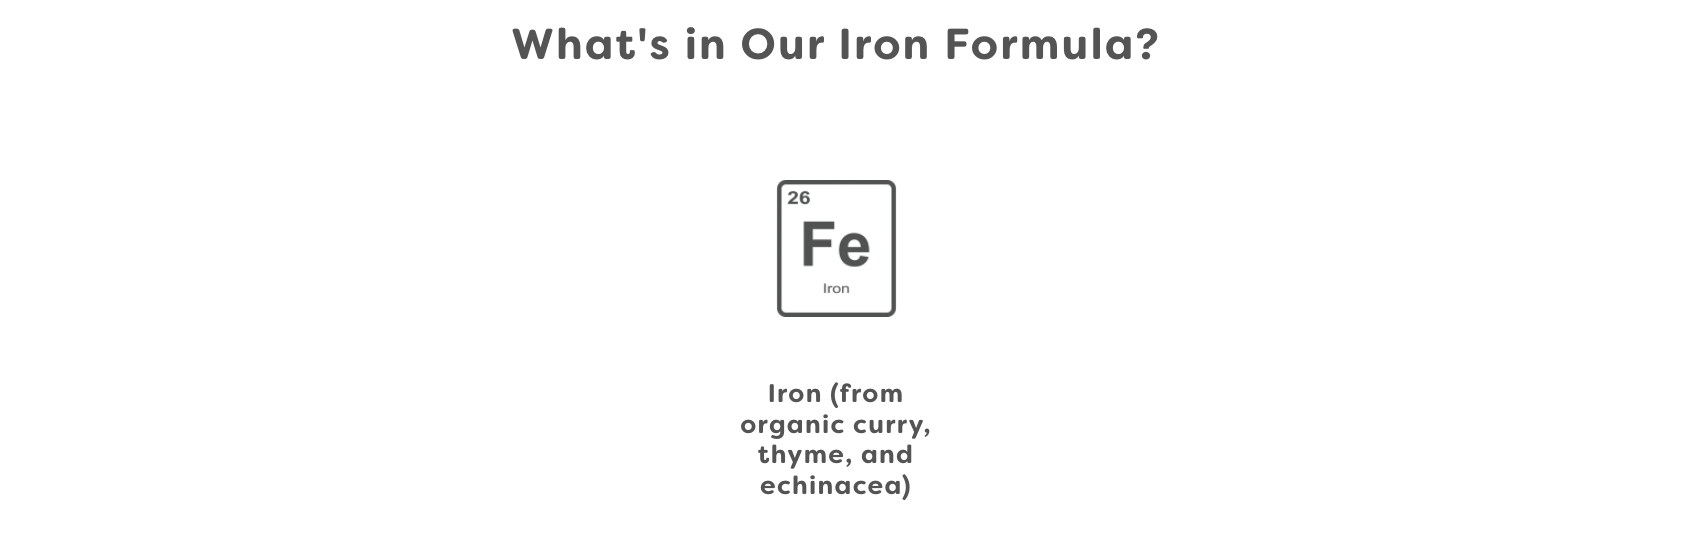 What's in Iron